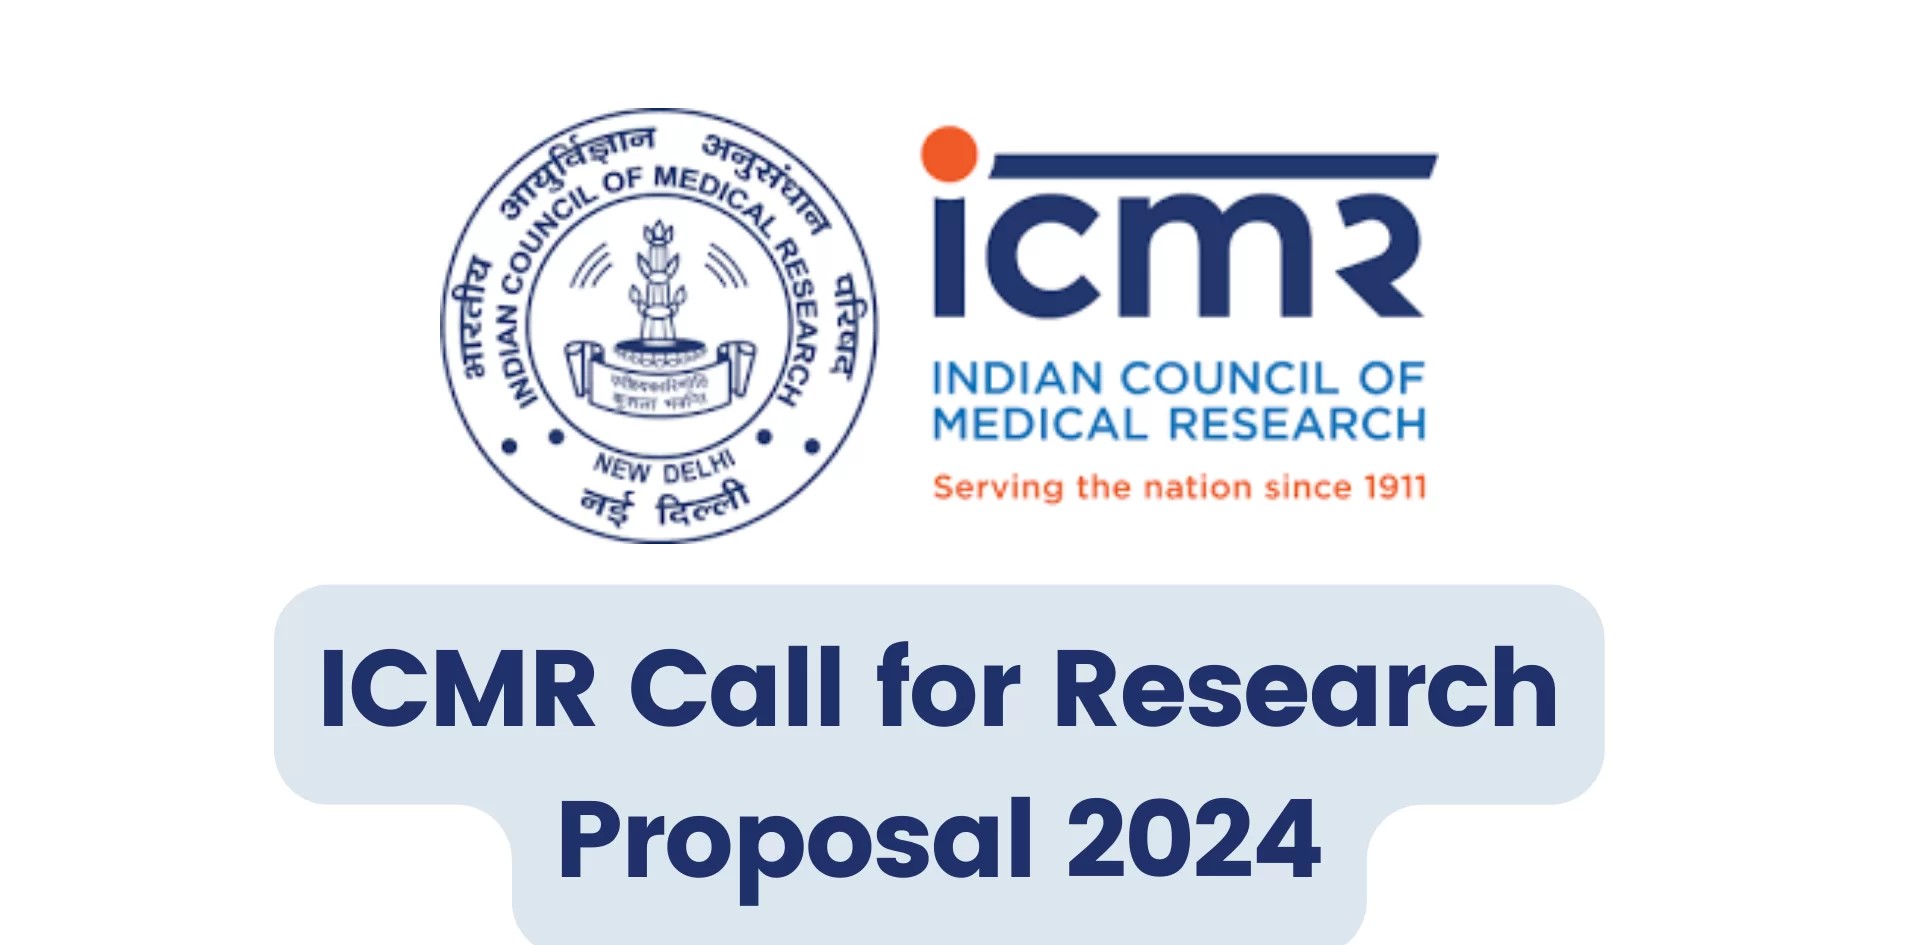 ICMR To Provide Research Grants Up To Rs 8 Crores Last Date To Submit